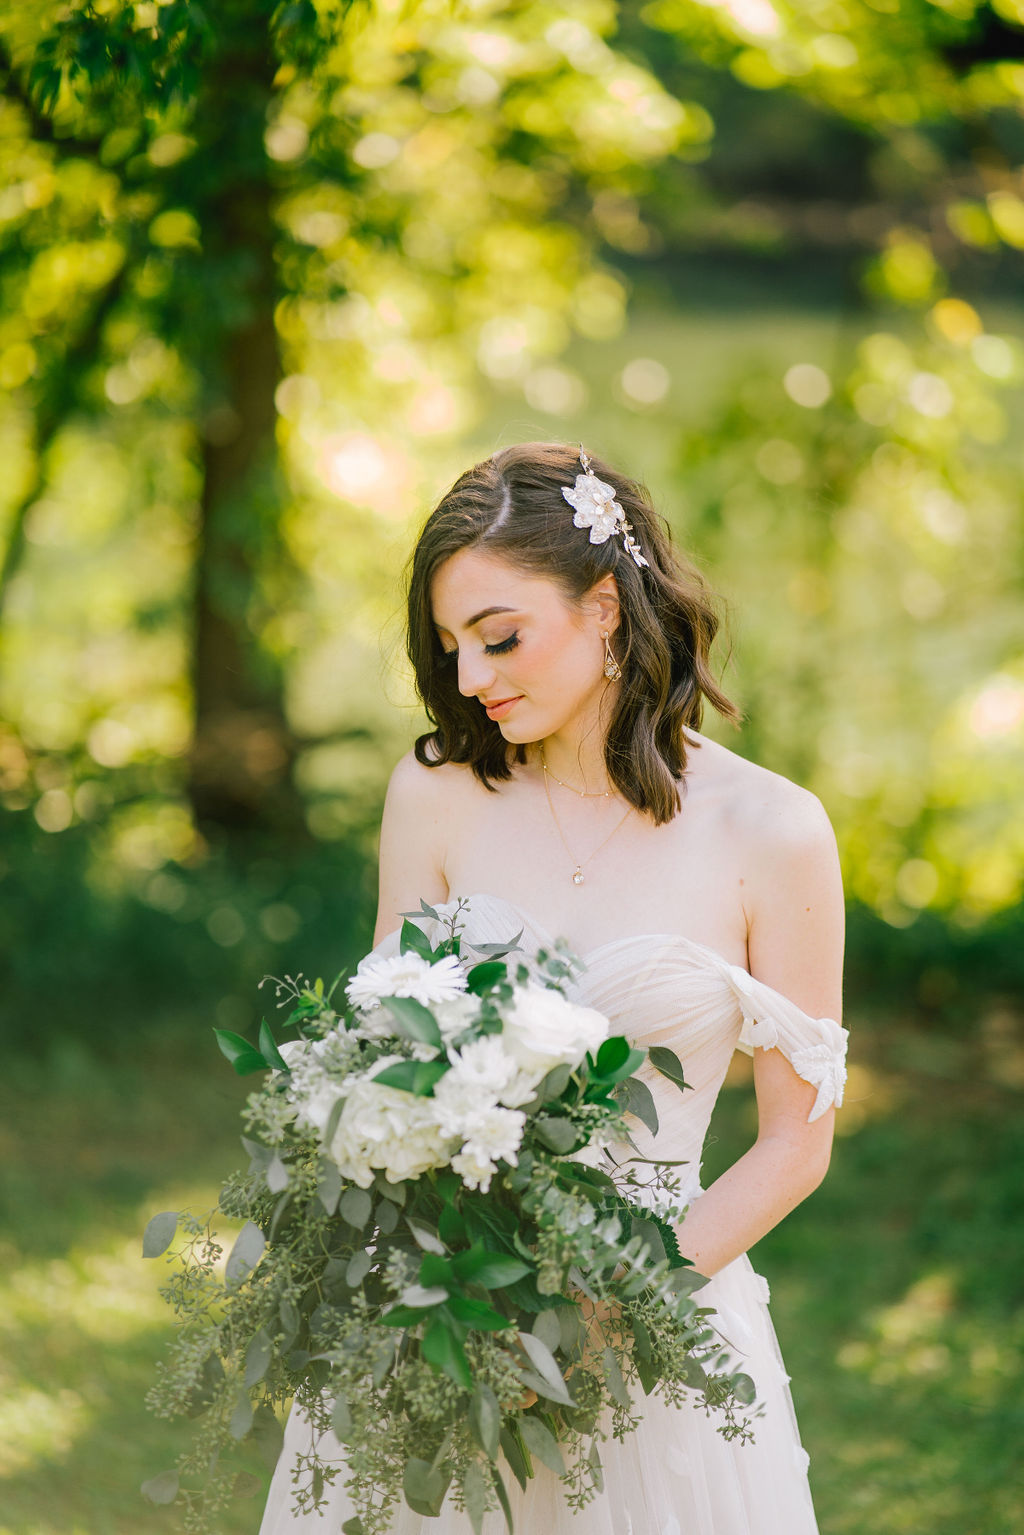 Bride outside while looking down at her bouquet of green and white flowers